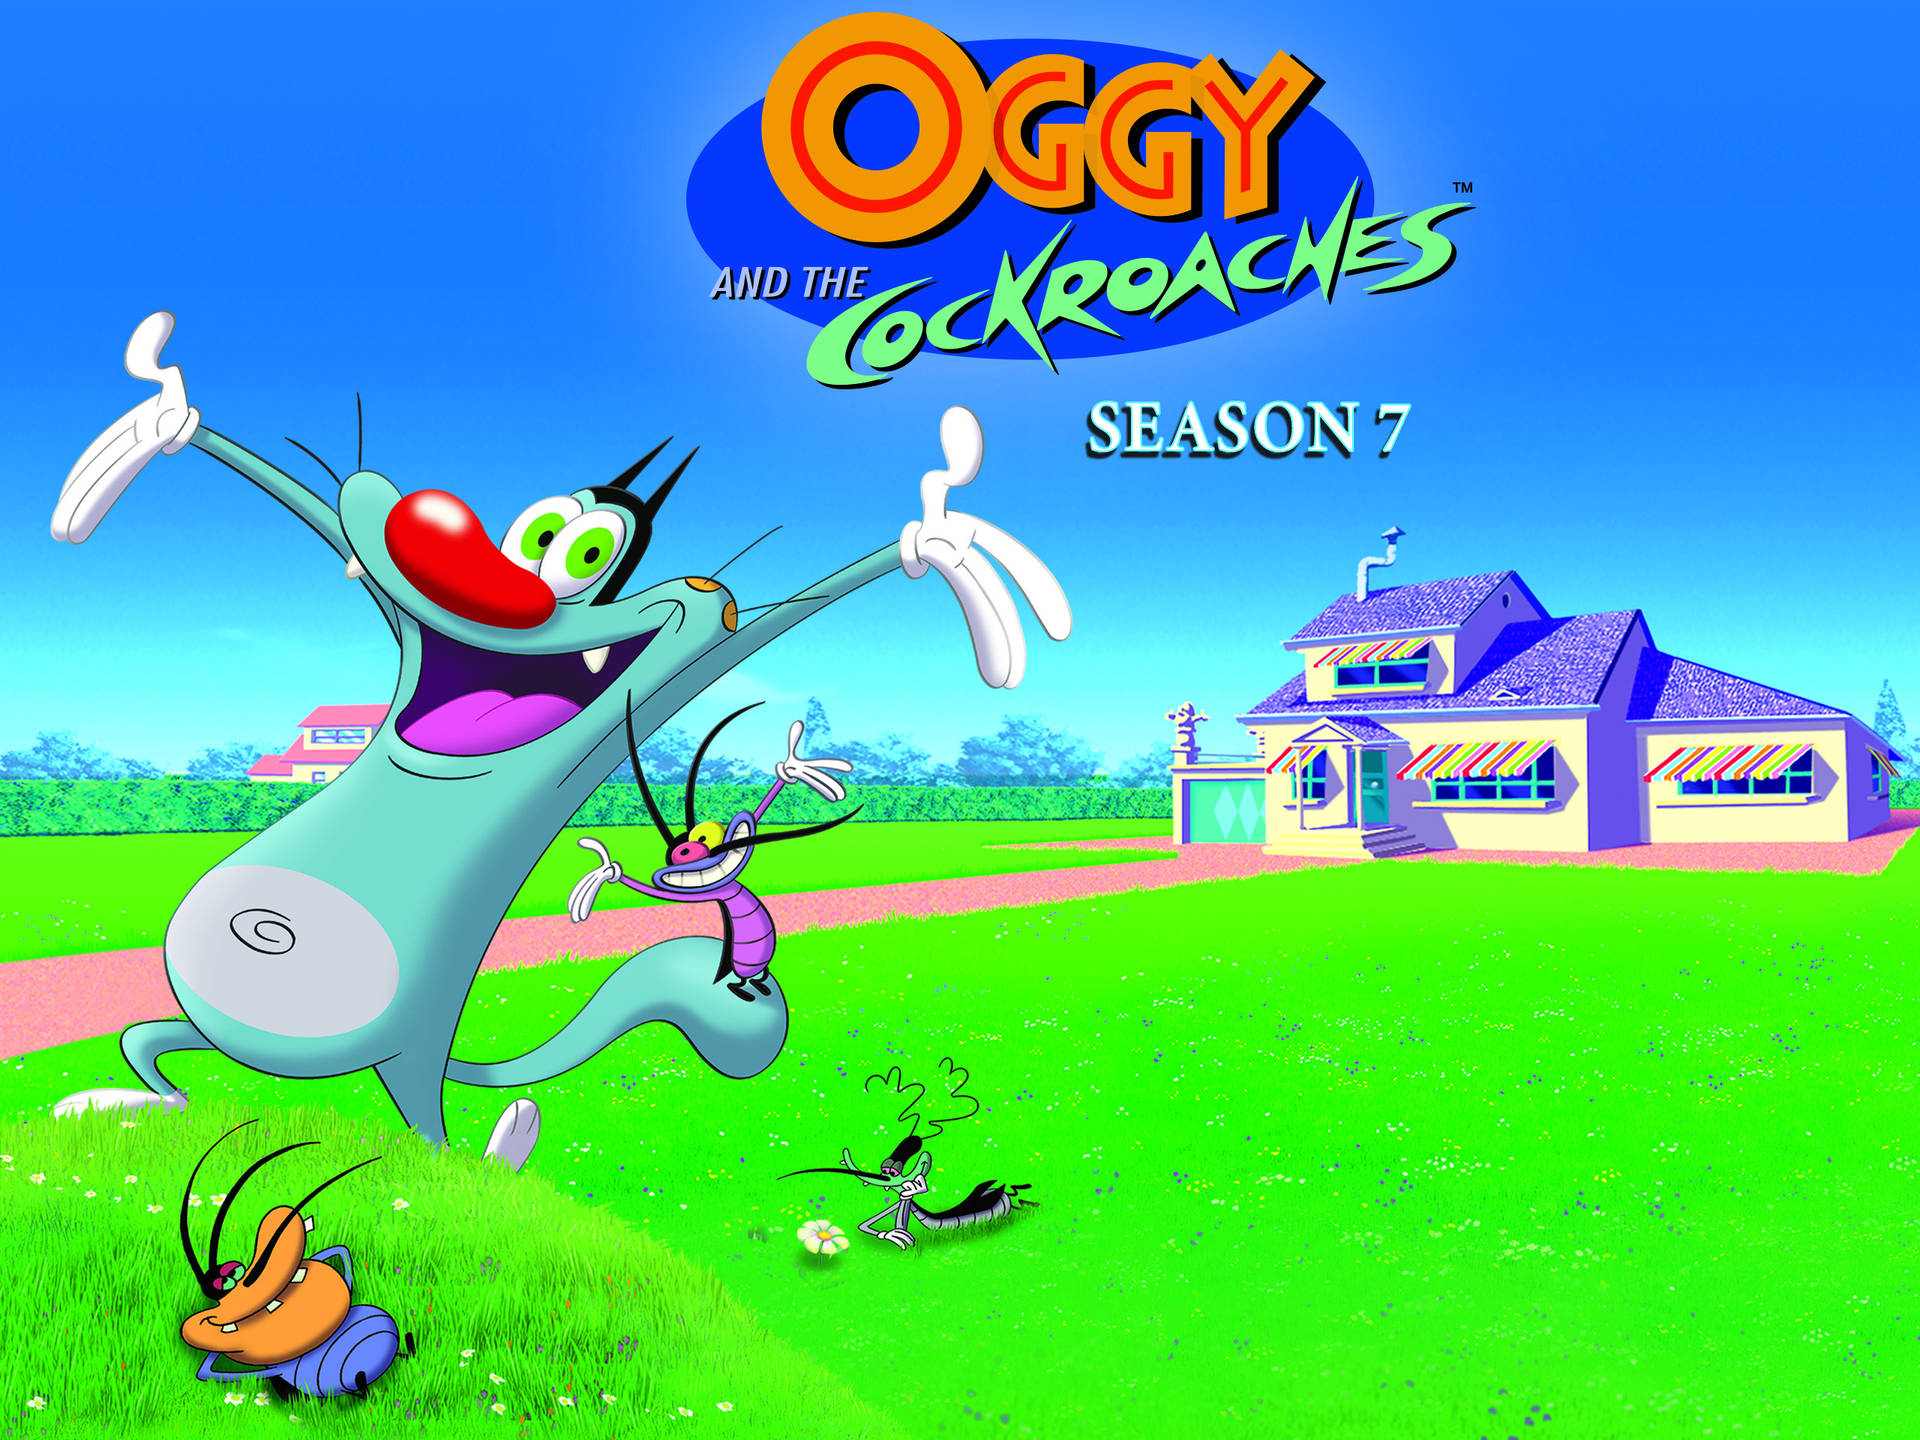 Oggy And The Cockroaches Season 7 Wallpaper